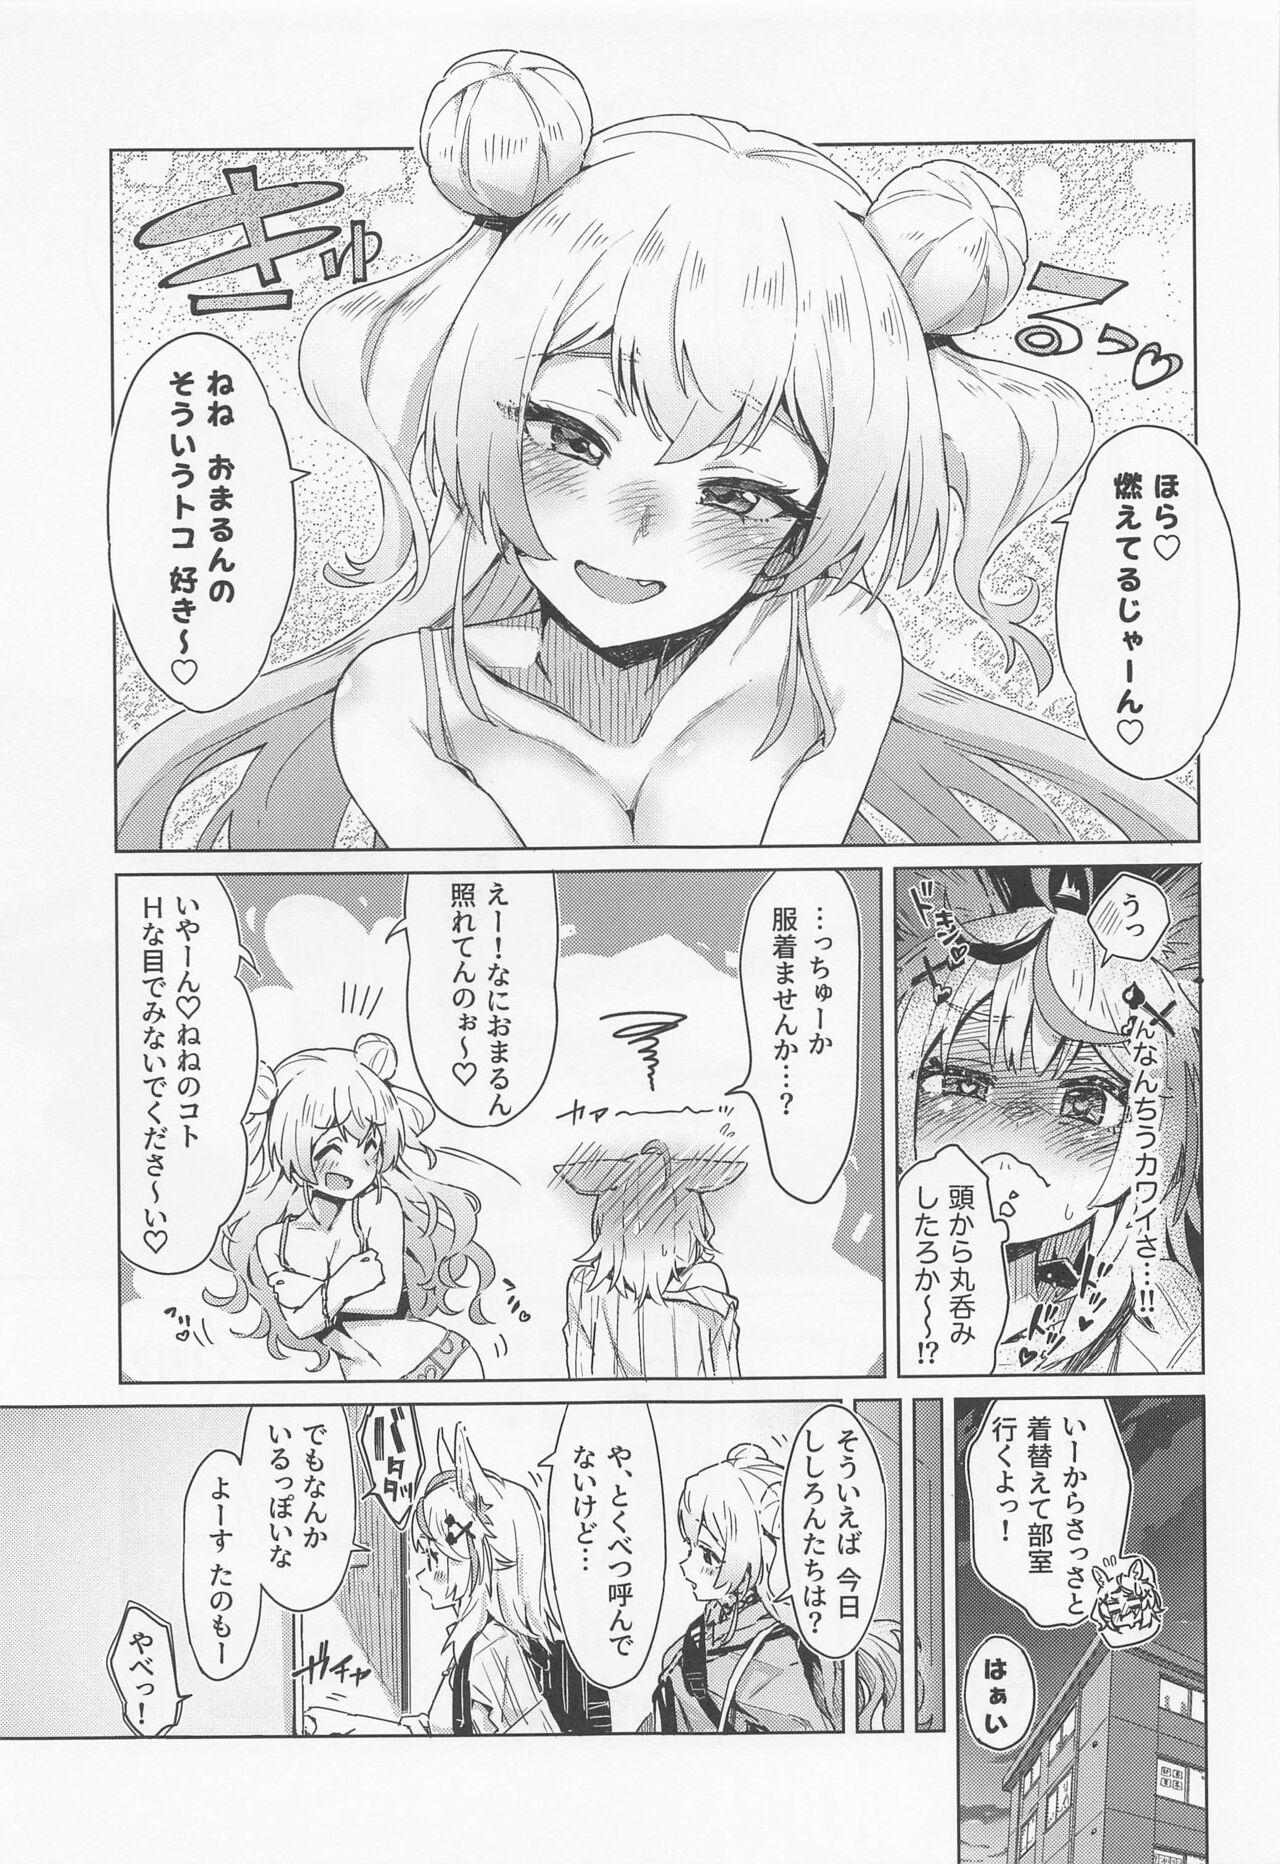 Hardcore Porno Fennec wa Iseijin no Yume o Miru ka - Does The Fennec Dream of The Lovely Visitor? - Hololive Cruising - Page 8